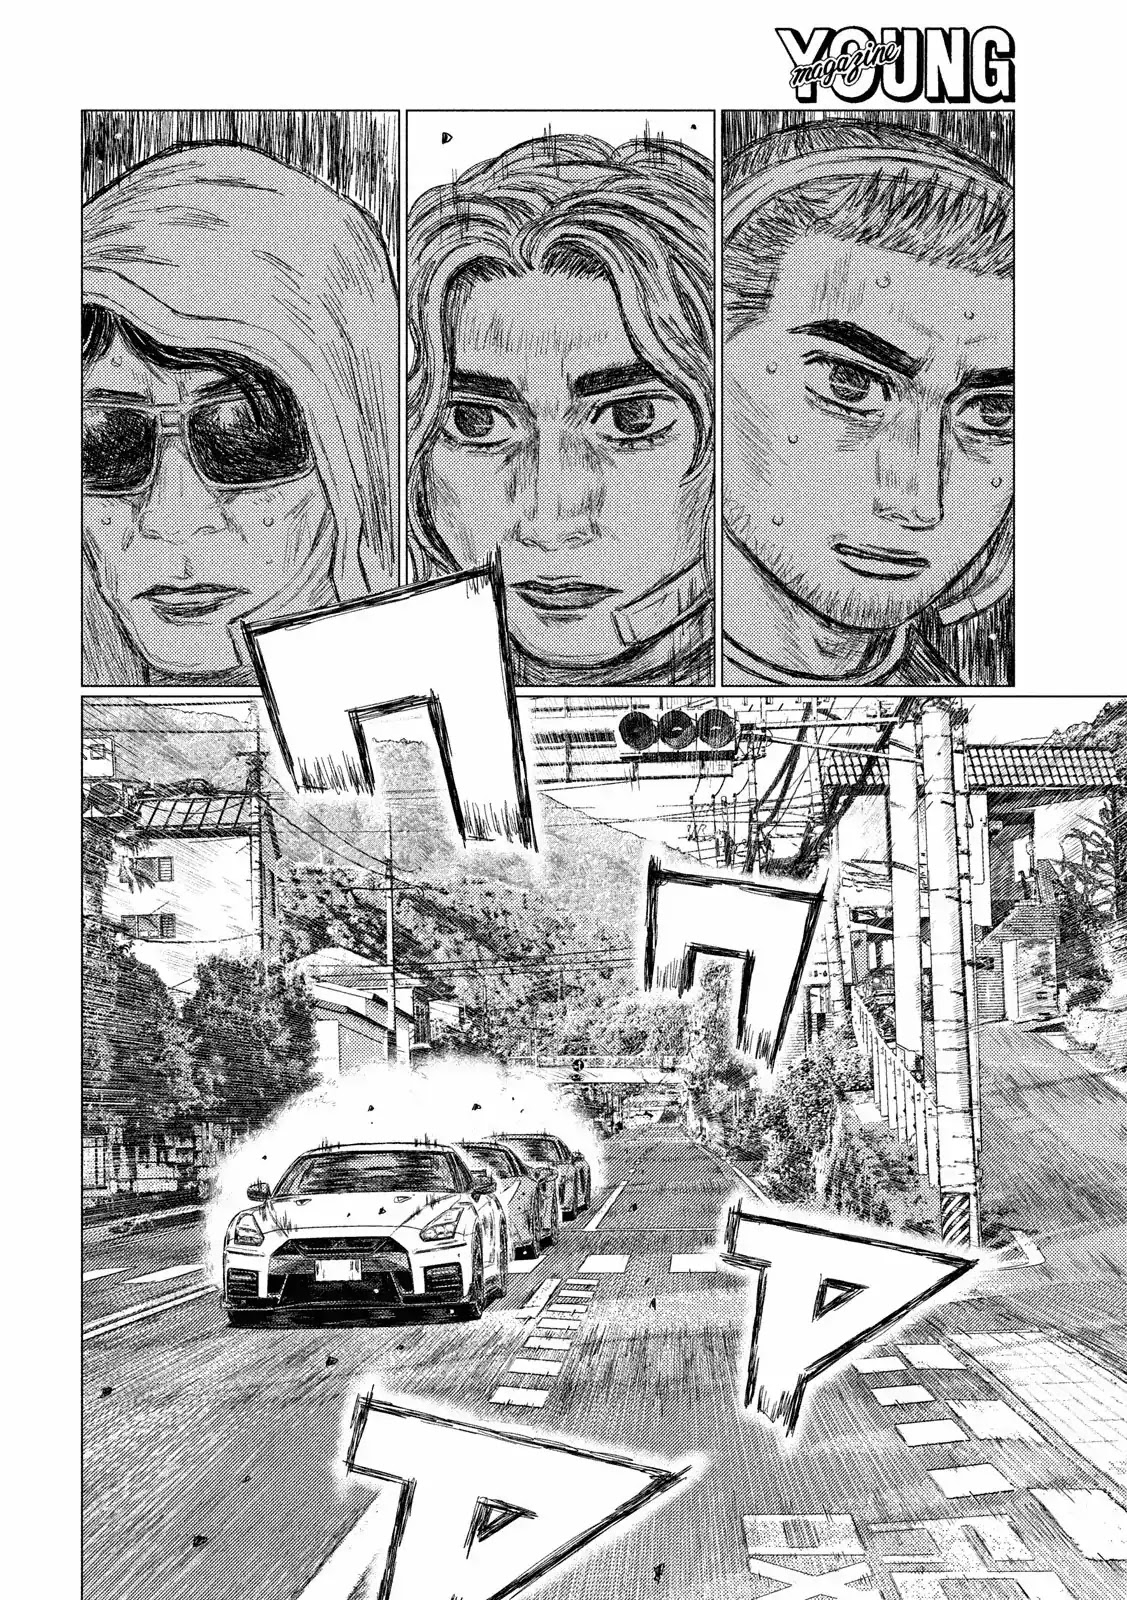 MF Ghost Chapter 42: Dog Fight At 300 Km/h